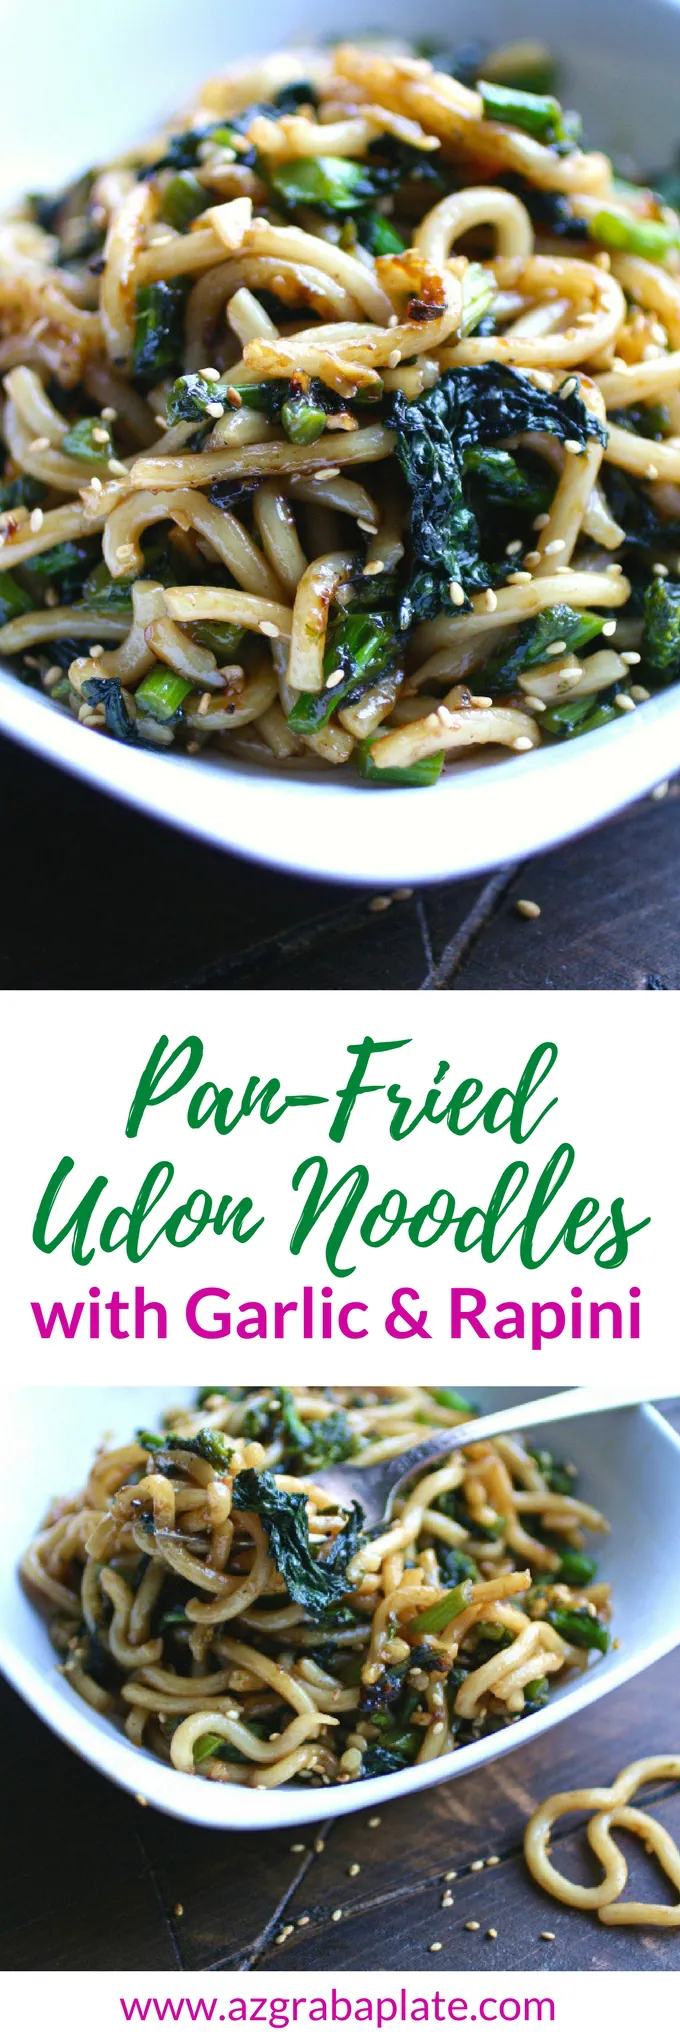 Pan-Fried Udon Noodles with Garlic and Rapini is an amazingly delicious and simple dish you'll love. It's so easy to make this noodle dish!